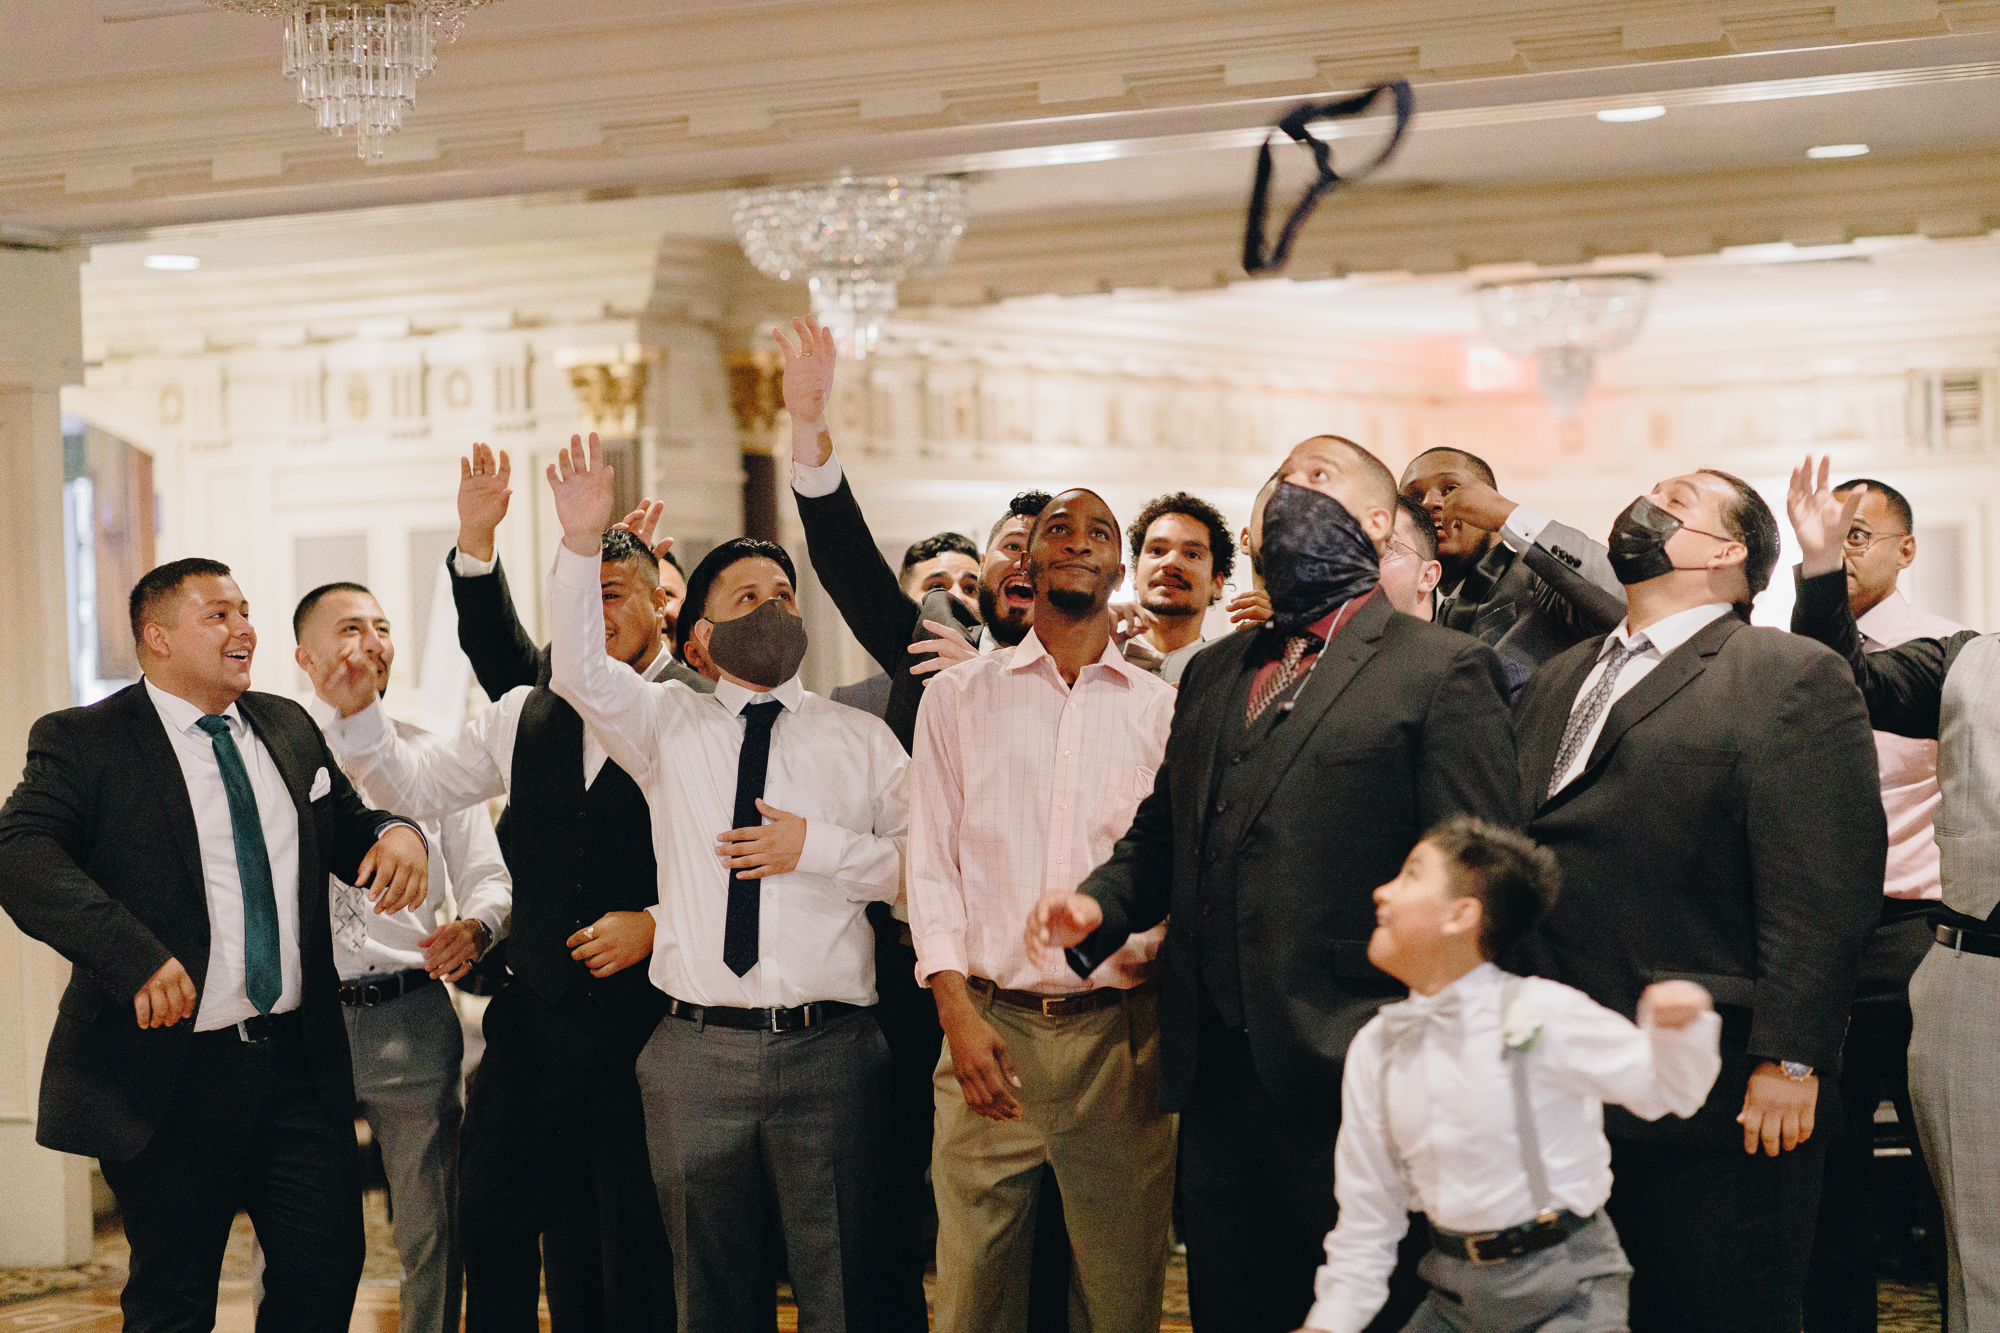 Groom tie toss at a wedding in New Jersey